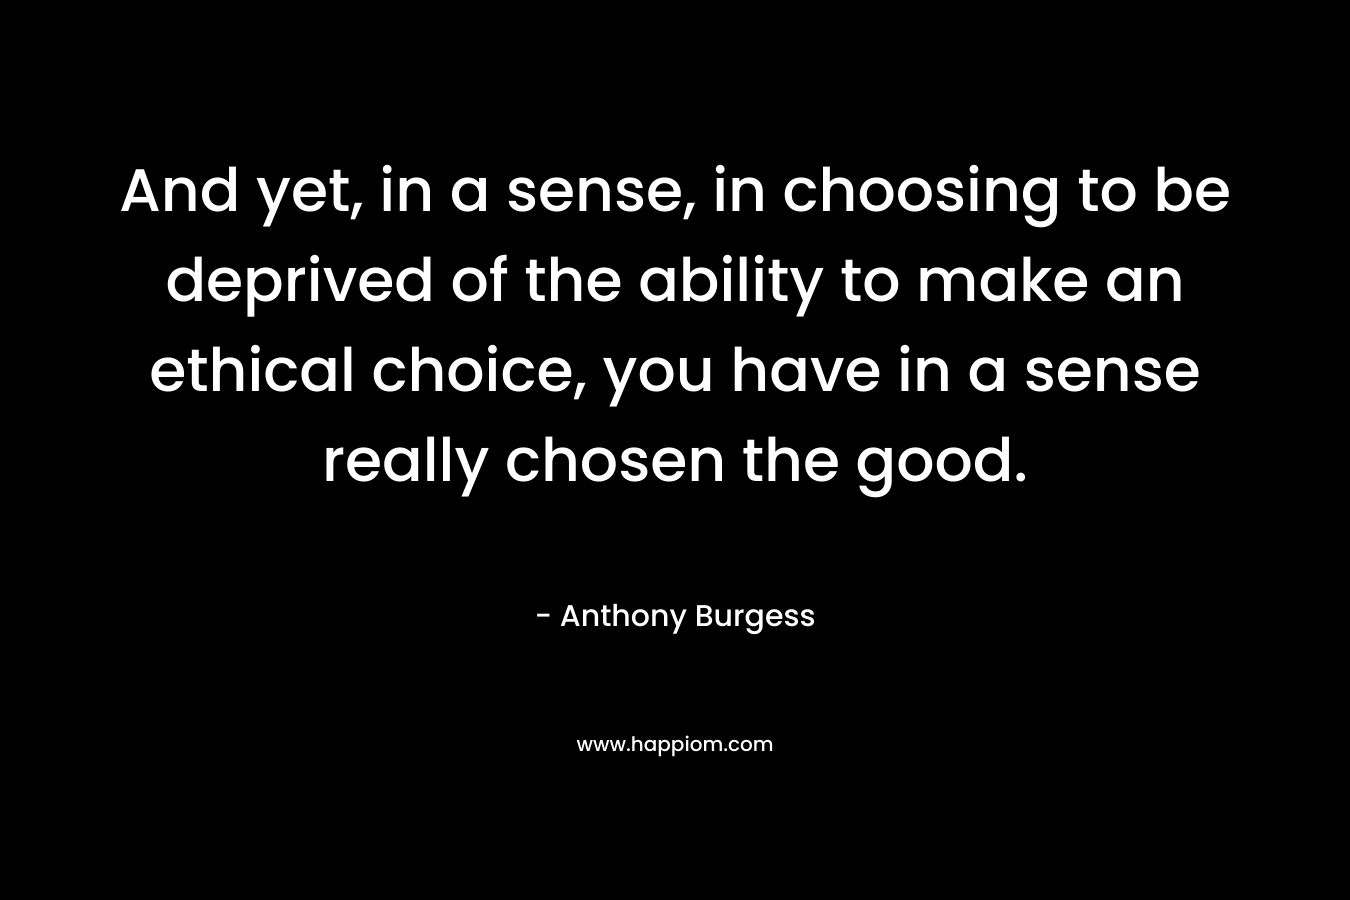 And yet, in a sense, in choosing to be deprived of the ability to make an ethical choice, you have in a sense really chosen the good.